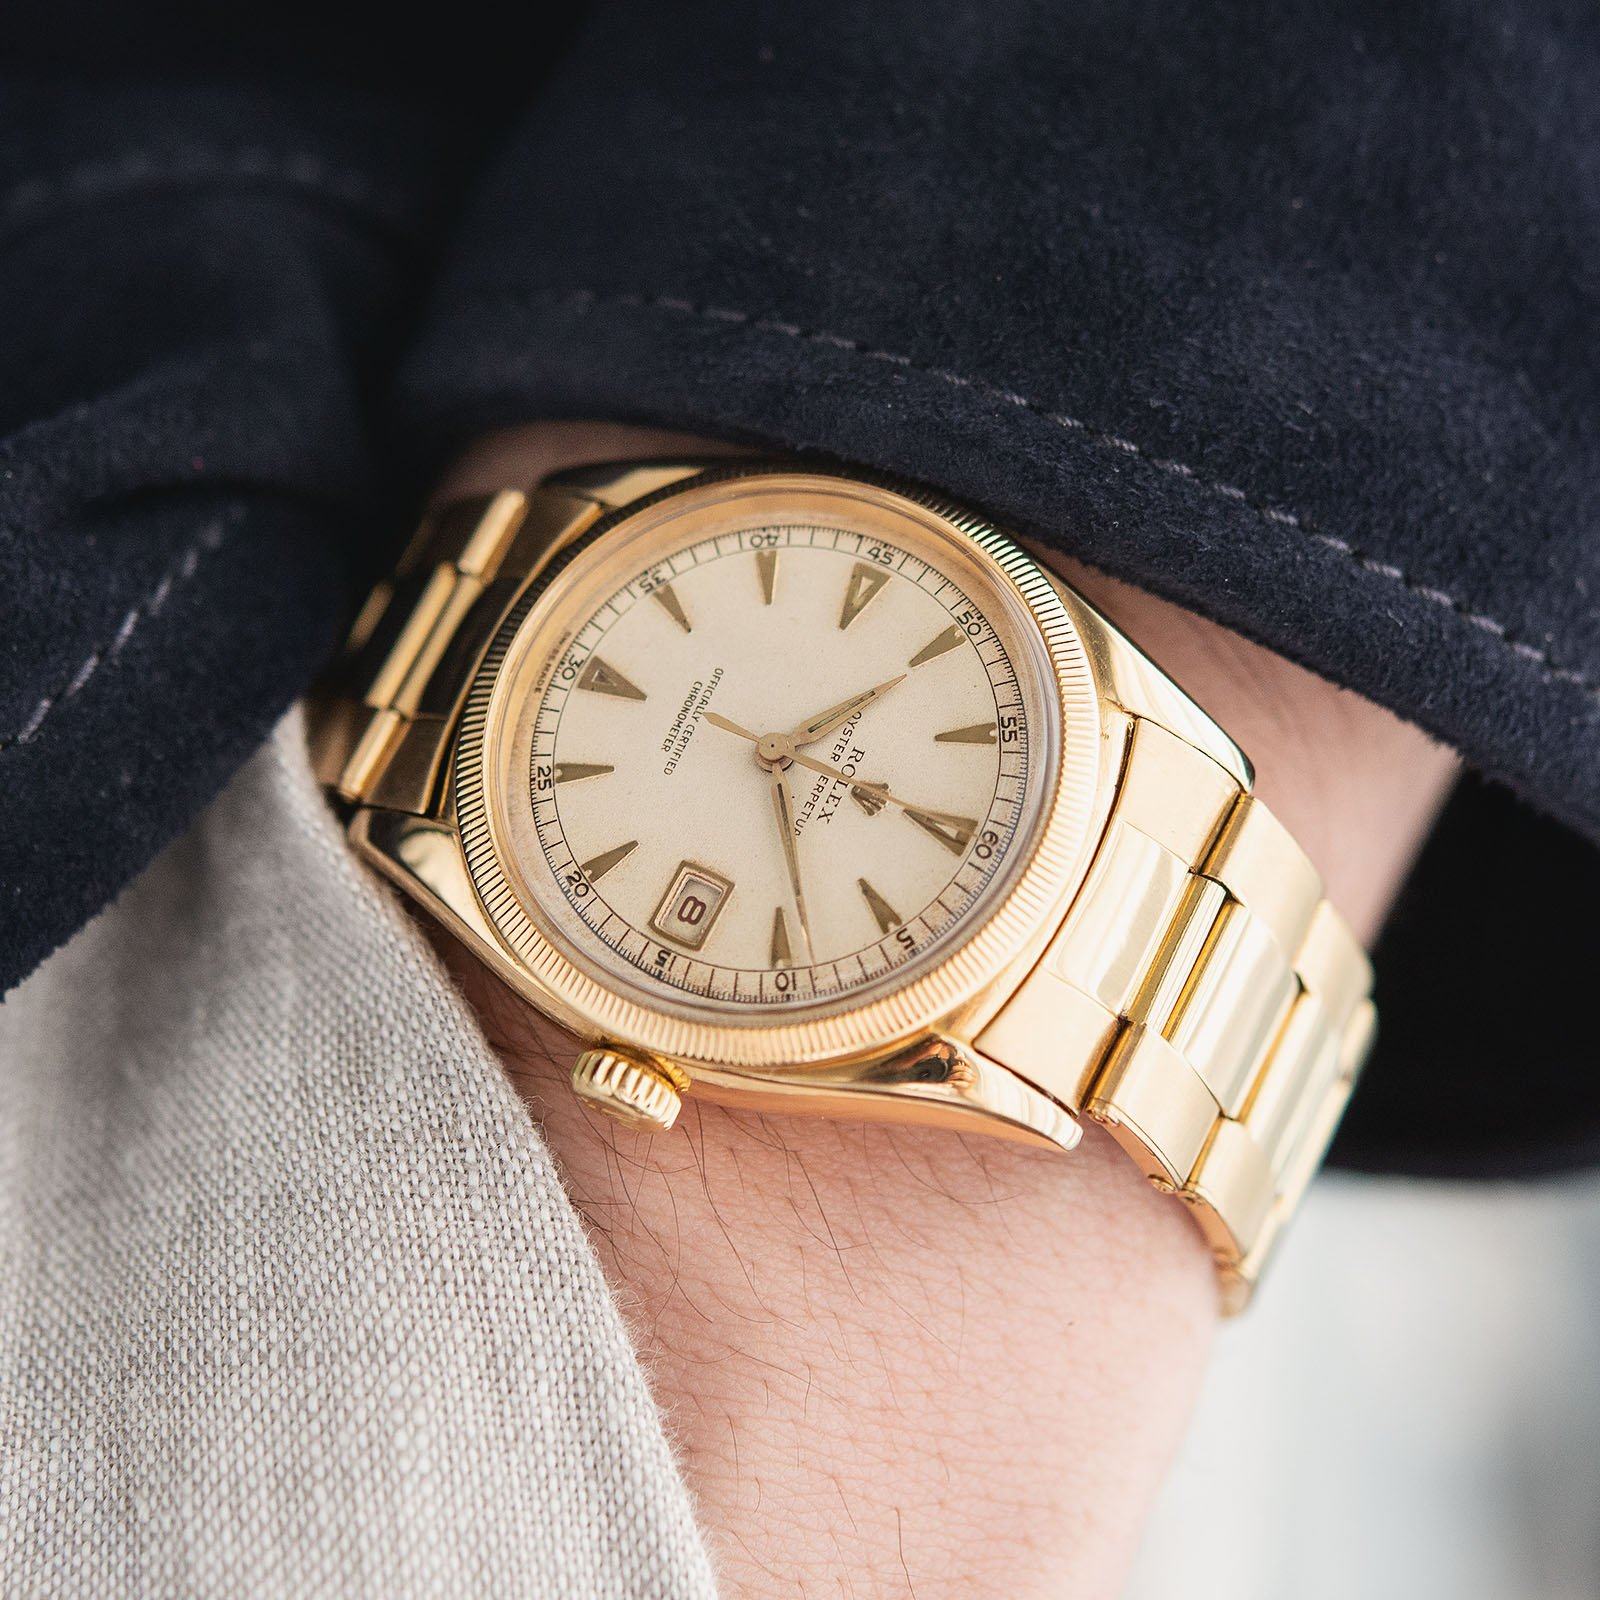 Rolex Ovettone Datejust Yellow Gold Reference 6155